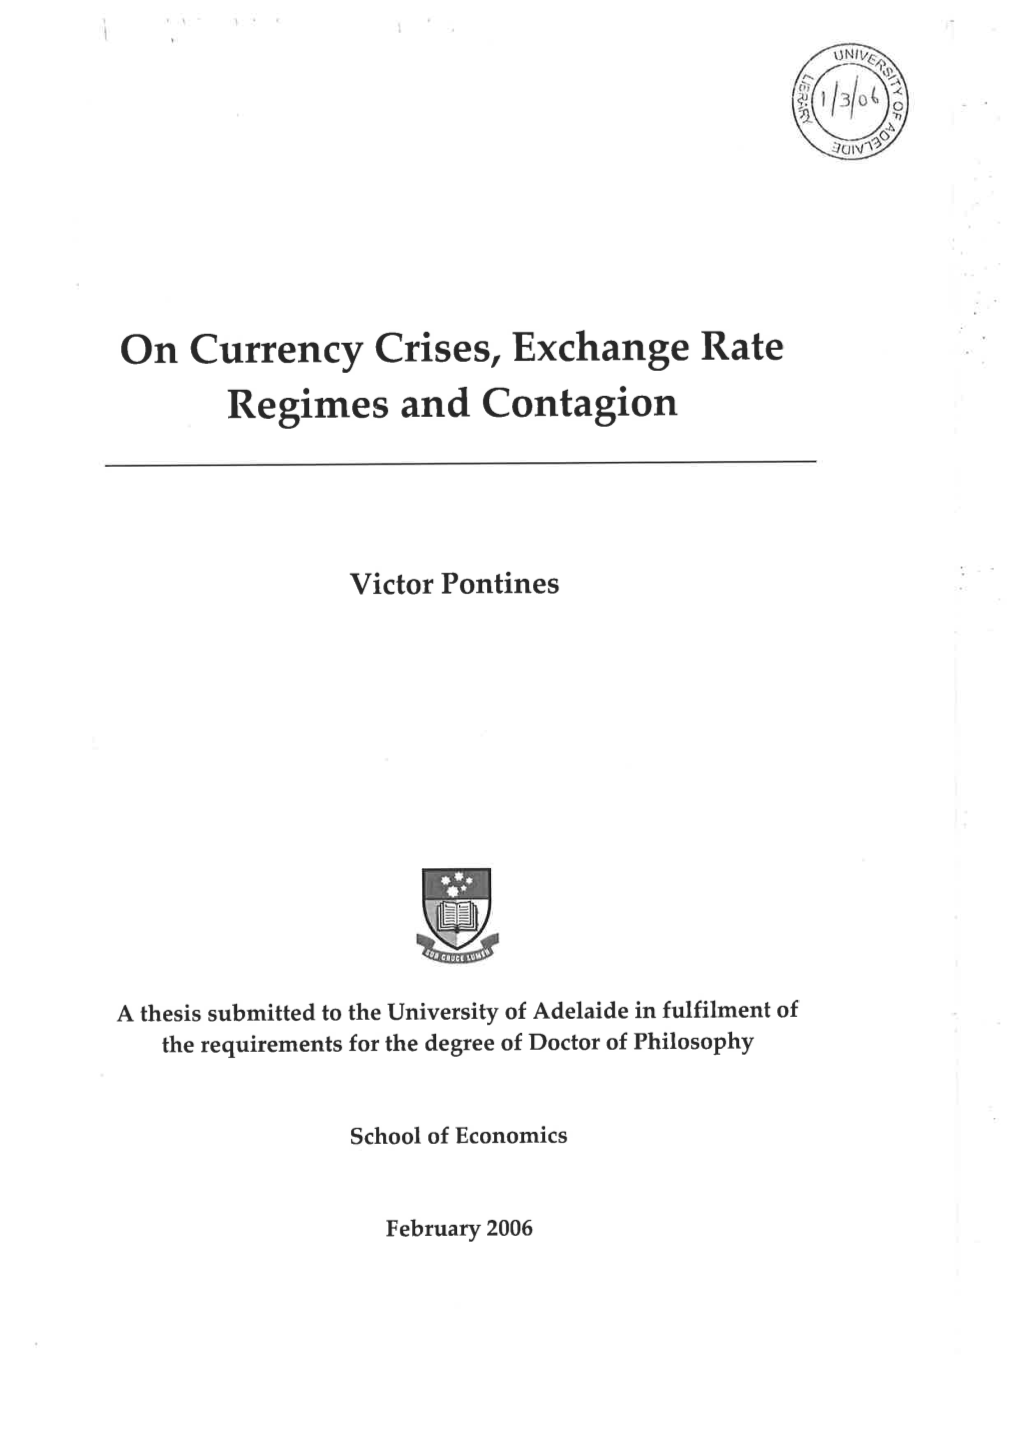 On Currency Crises, Exchange Rate Regimes and Contagion